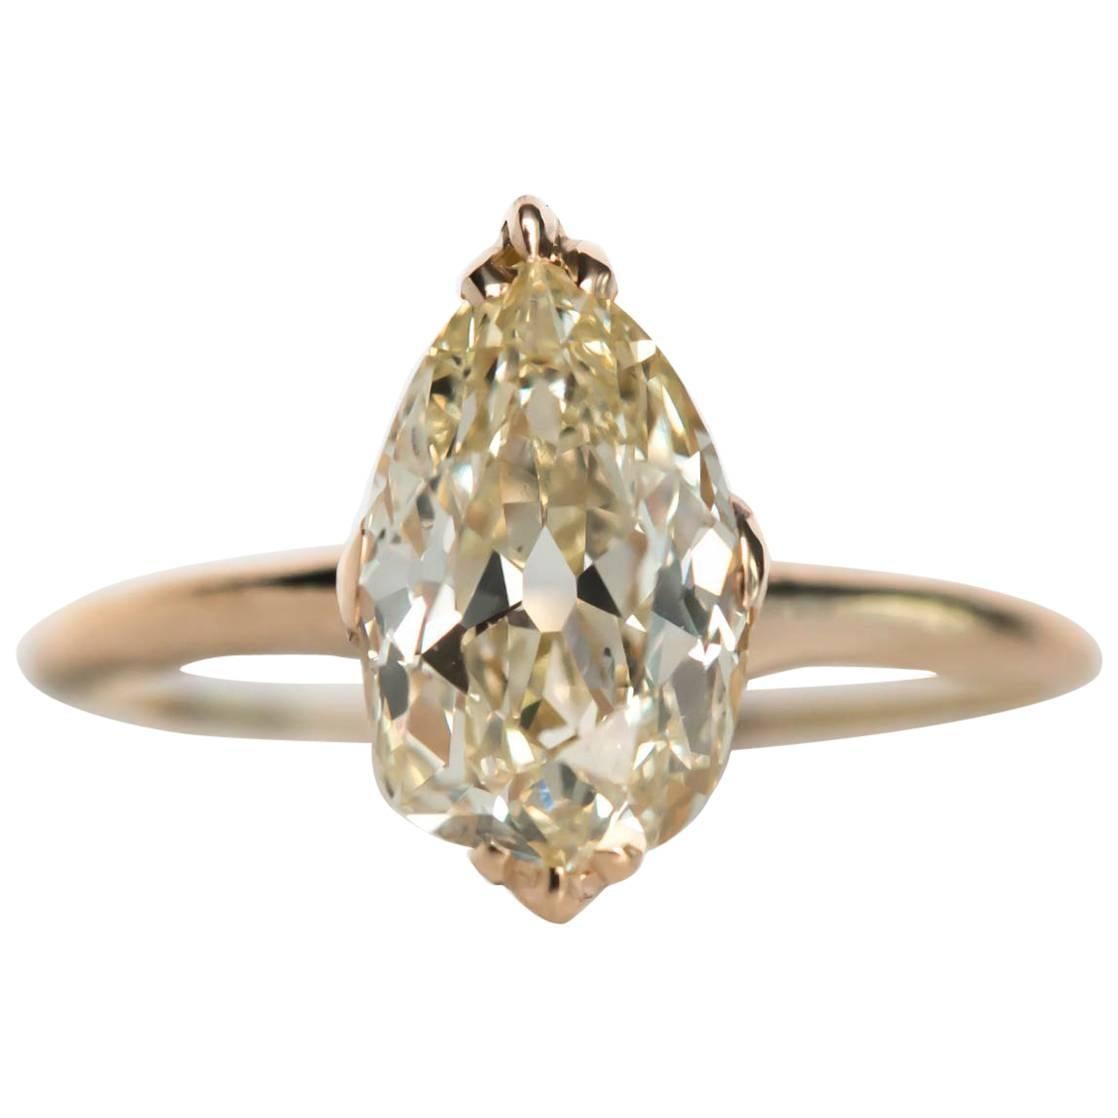 1890s Victorian Yellow Gold GIA Certified 2.13 Carat Diamond Engagement Ring